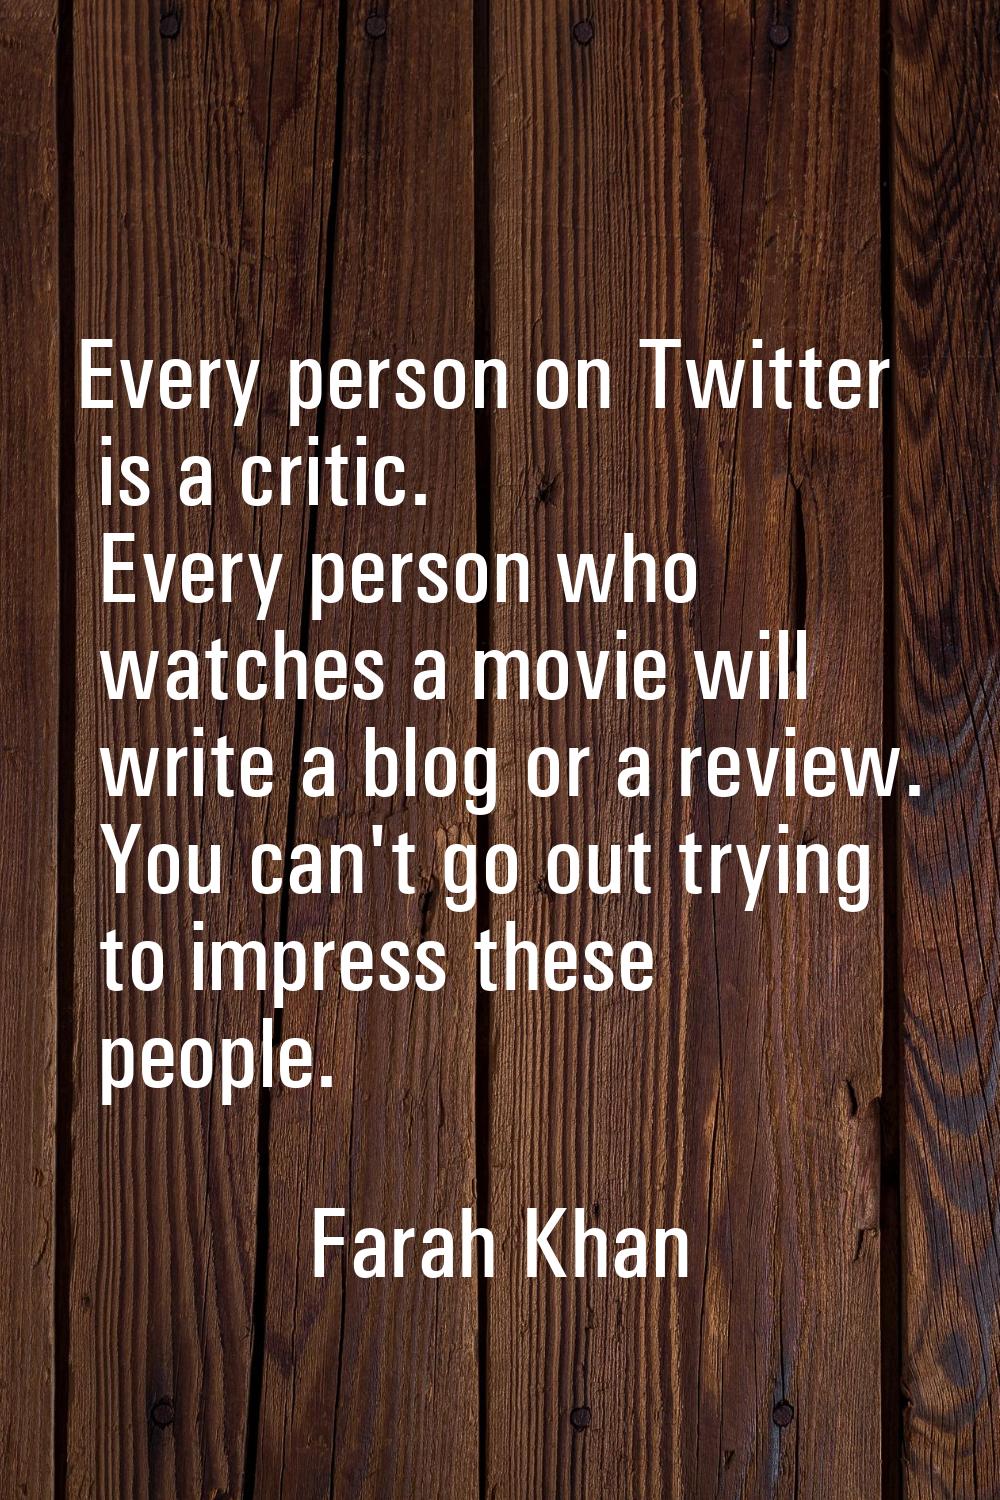 Every person on Twitter is a critic. Every person who watches a movie will write a blog or a review